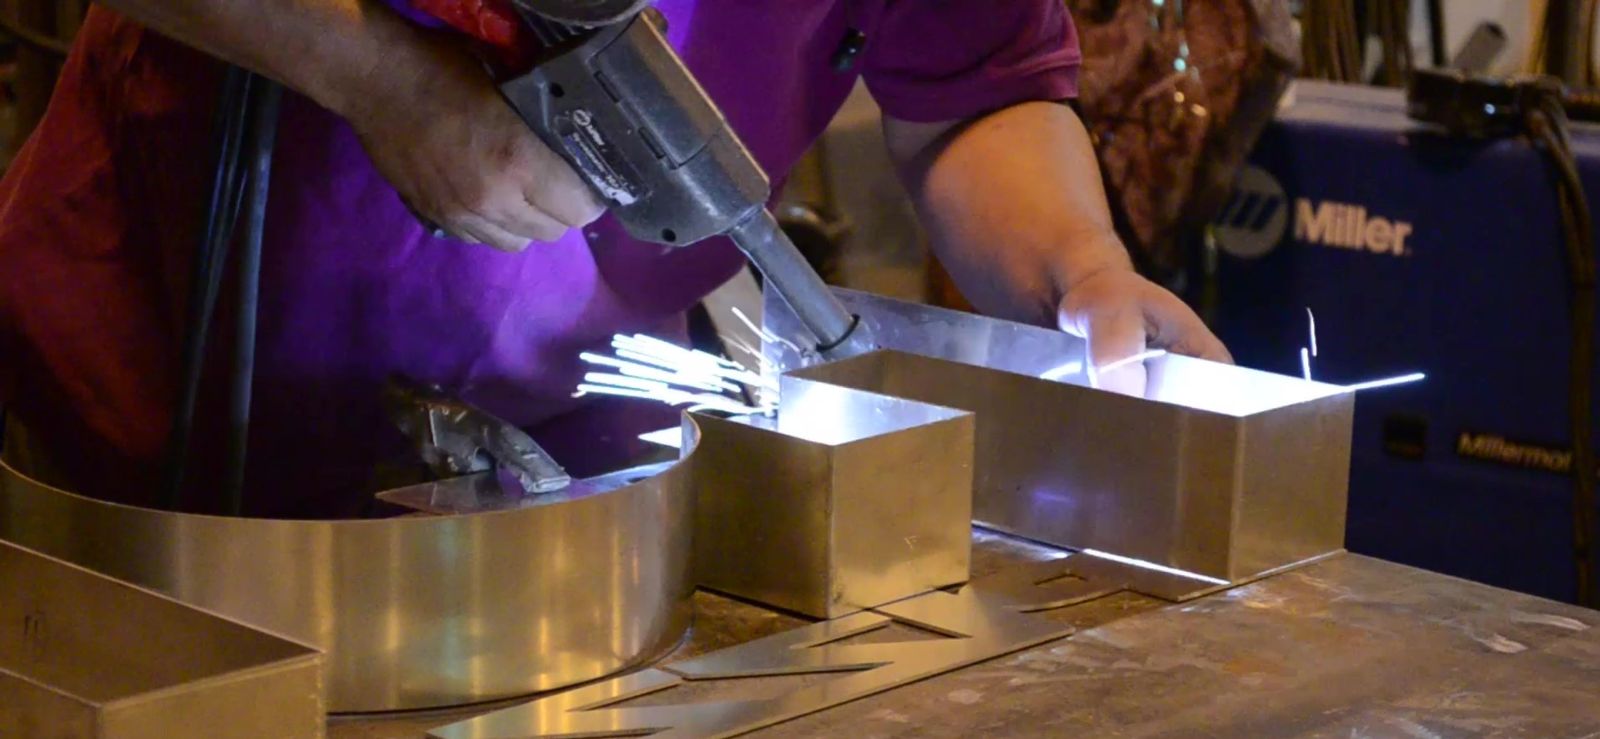 Female Fabricator Constructing Metal Sign Using Specialized Tools